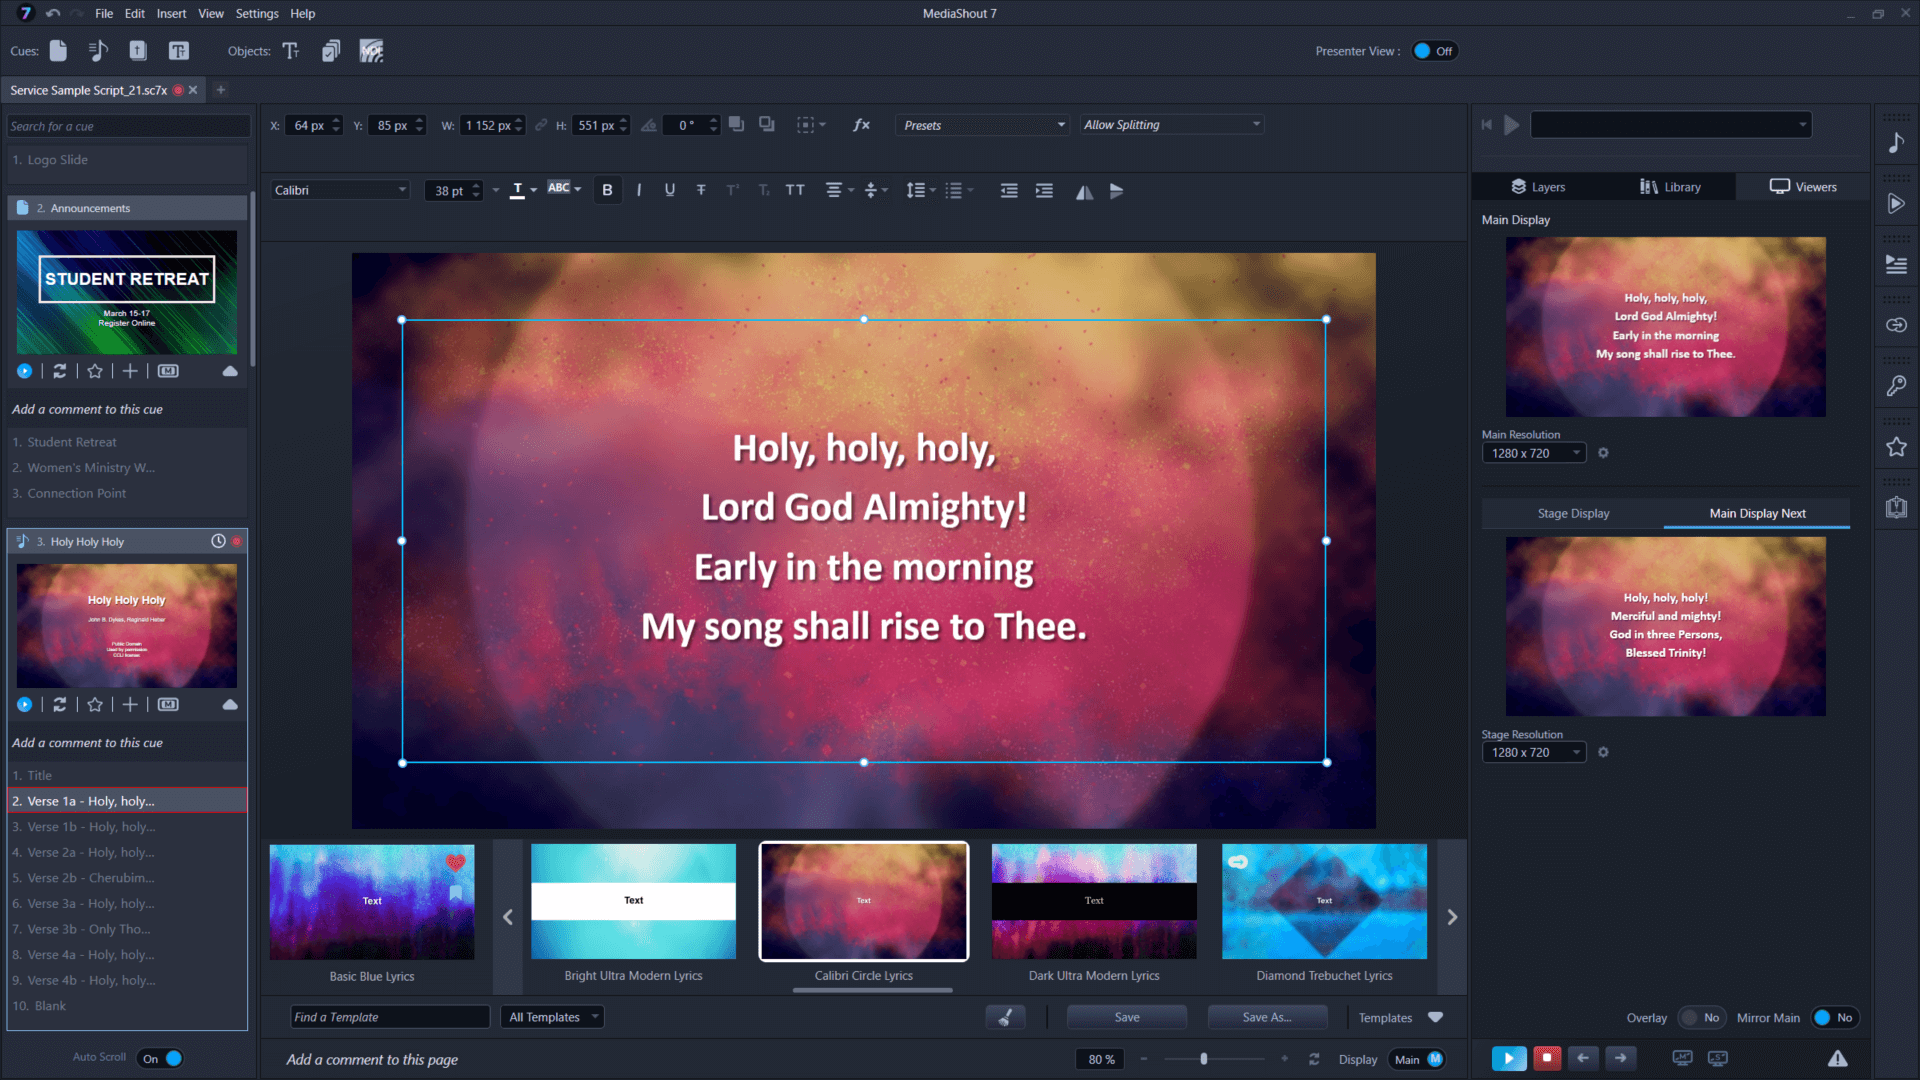 Seamless Integration: MediaShout seamlessly integrates with popular church presentation software, allowing for smooth transitions and compatibility.
Extensive Media Library: MediaShout offers an extensive media library, providing access to a wide range of biblical backgrounds, images, videos, and more.